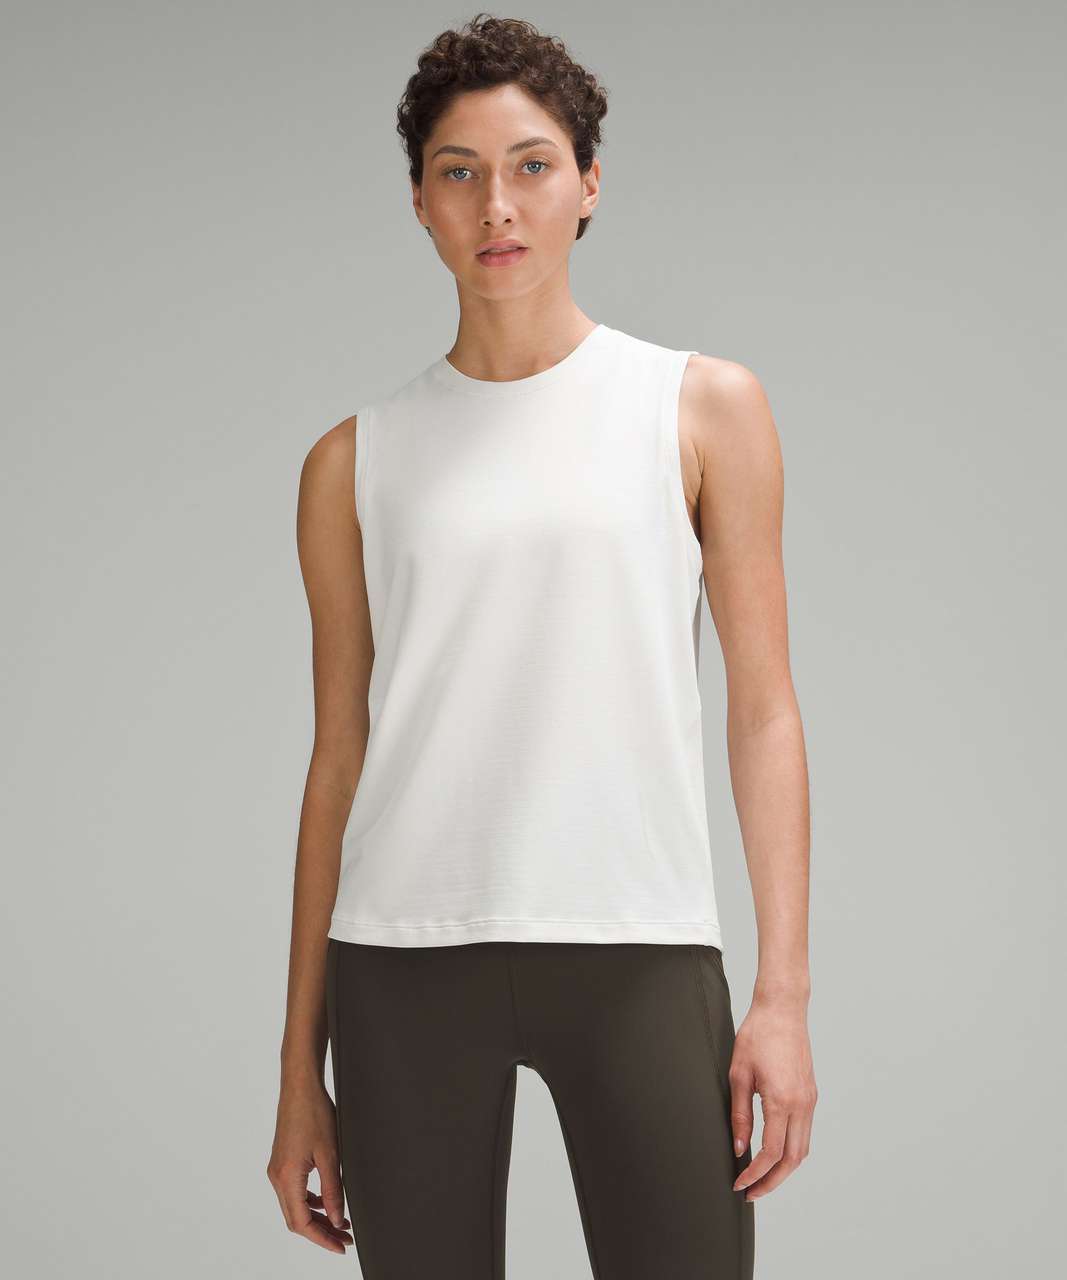 Lululemon athletica License to Train Classic-Fit Long-Sleeve Shirt, Women's Long Sleeve Shirts